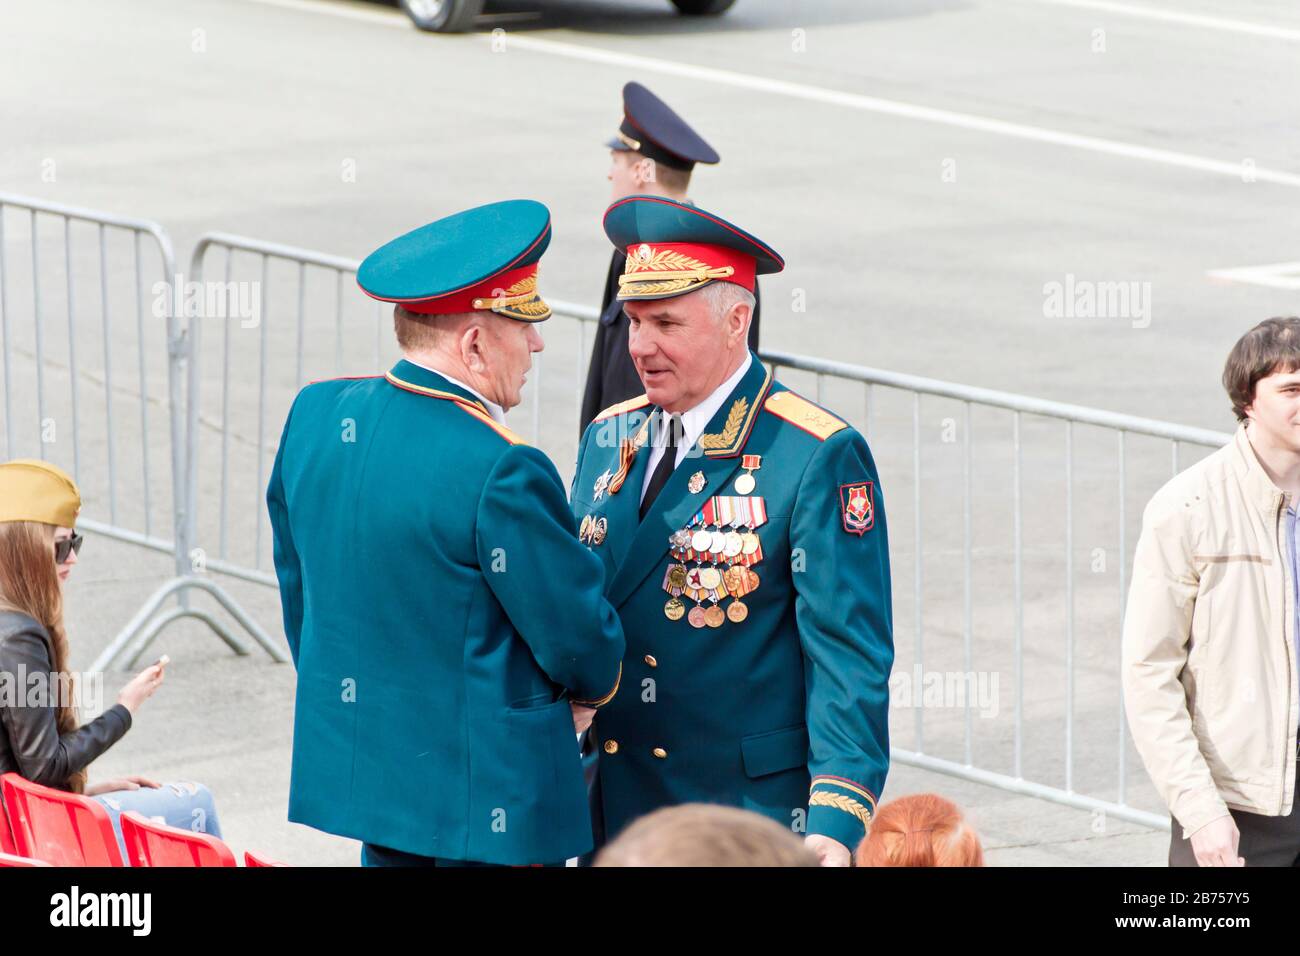 SAMARA, RUSSIA - MAY 9, 2017: Meeting of old friends on celebration on annual Victory Day, May, 9, 2017 in Samara, Russia Stock Photo